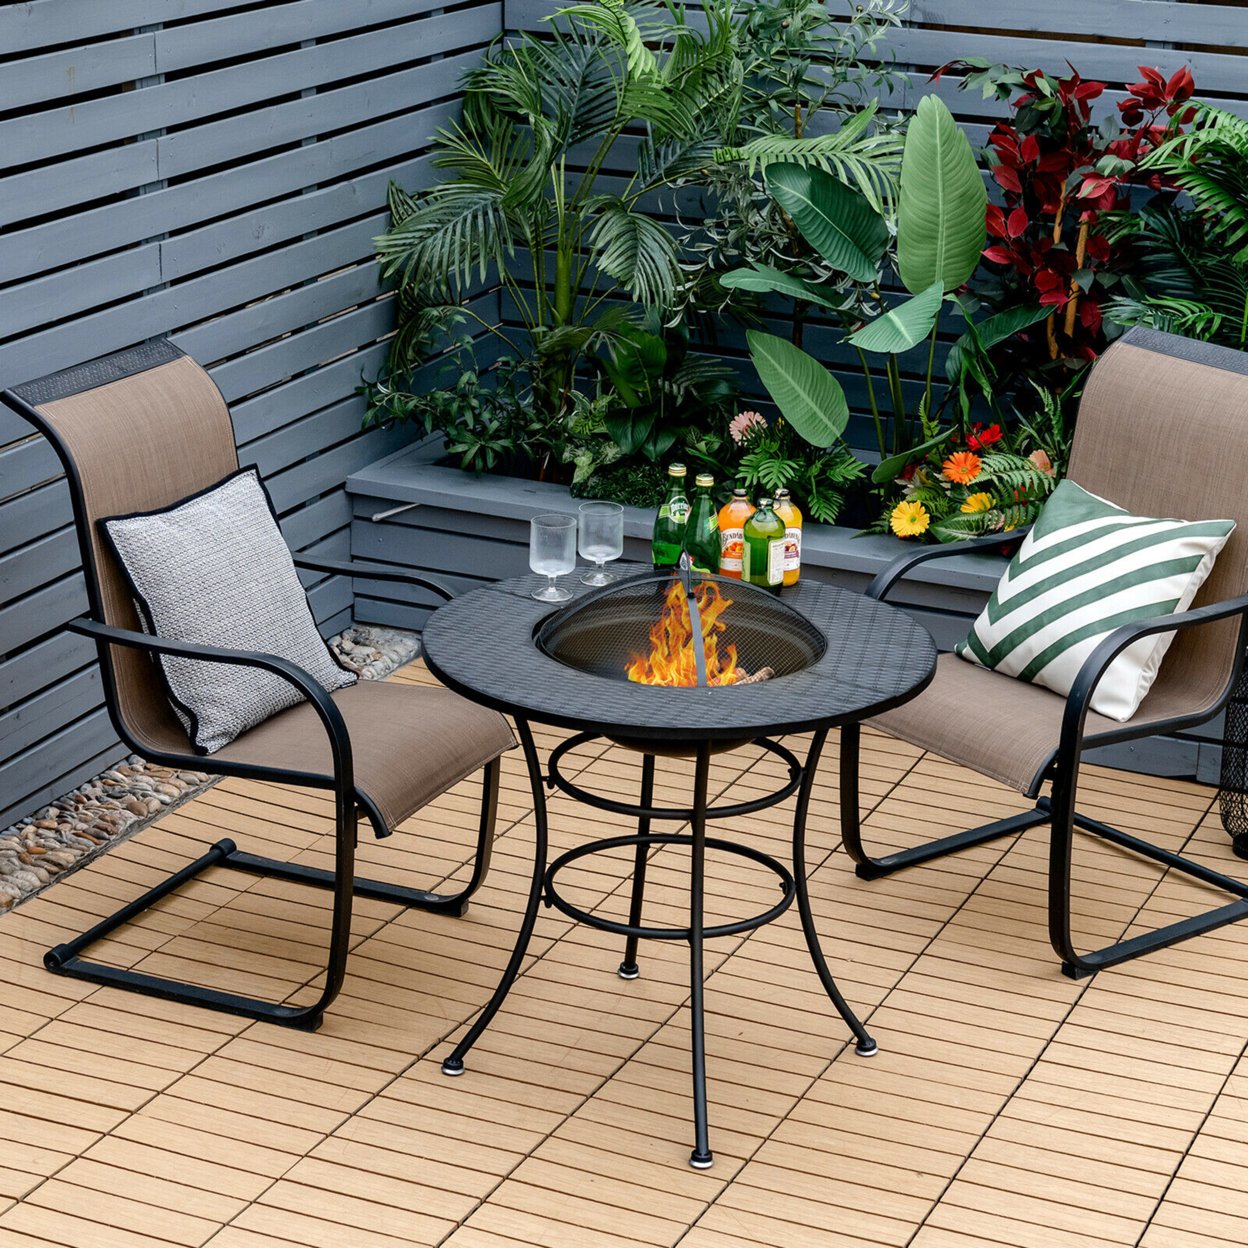 31.5'' Patio Fire Pit Dining Table Charcoal Wood Burning W/ Cooking BBQ Grate